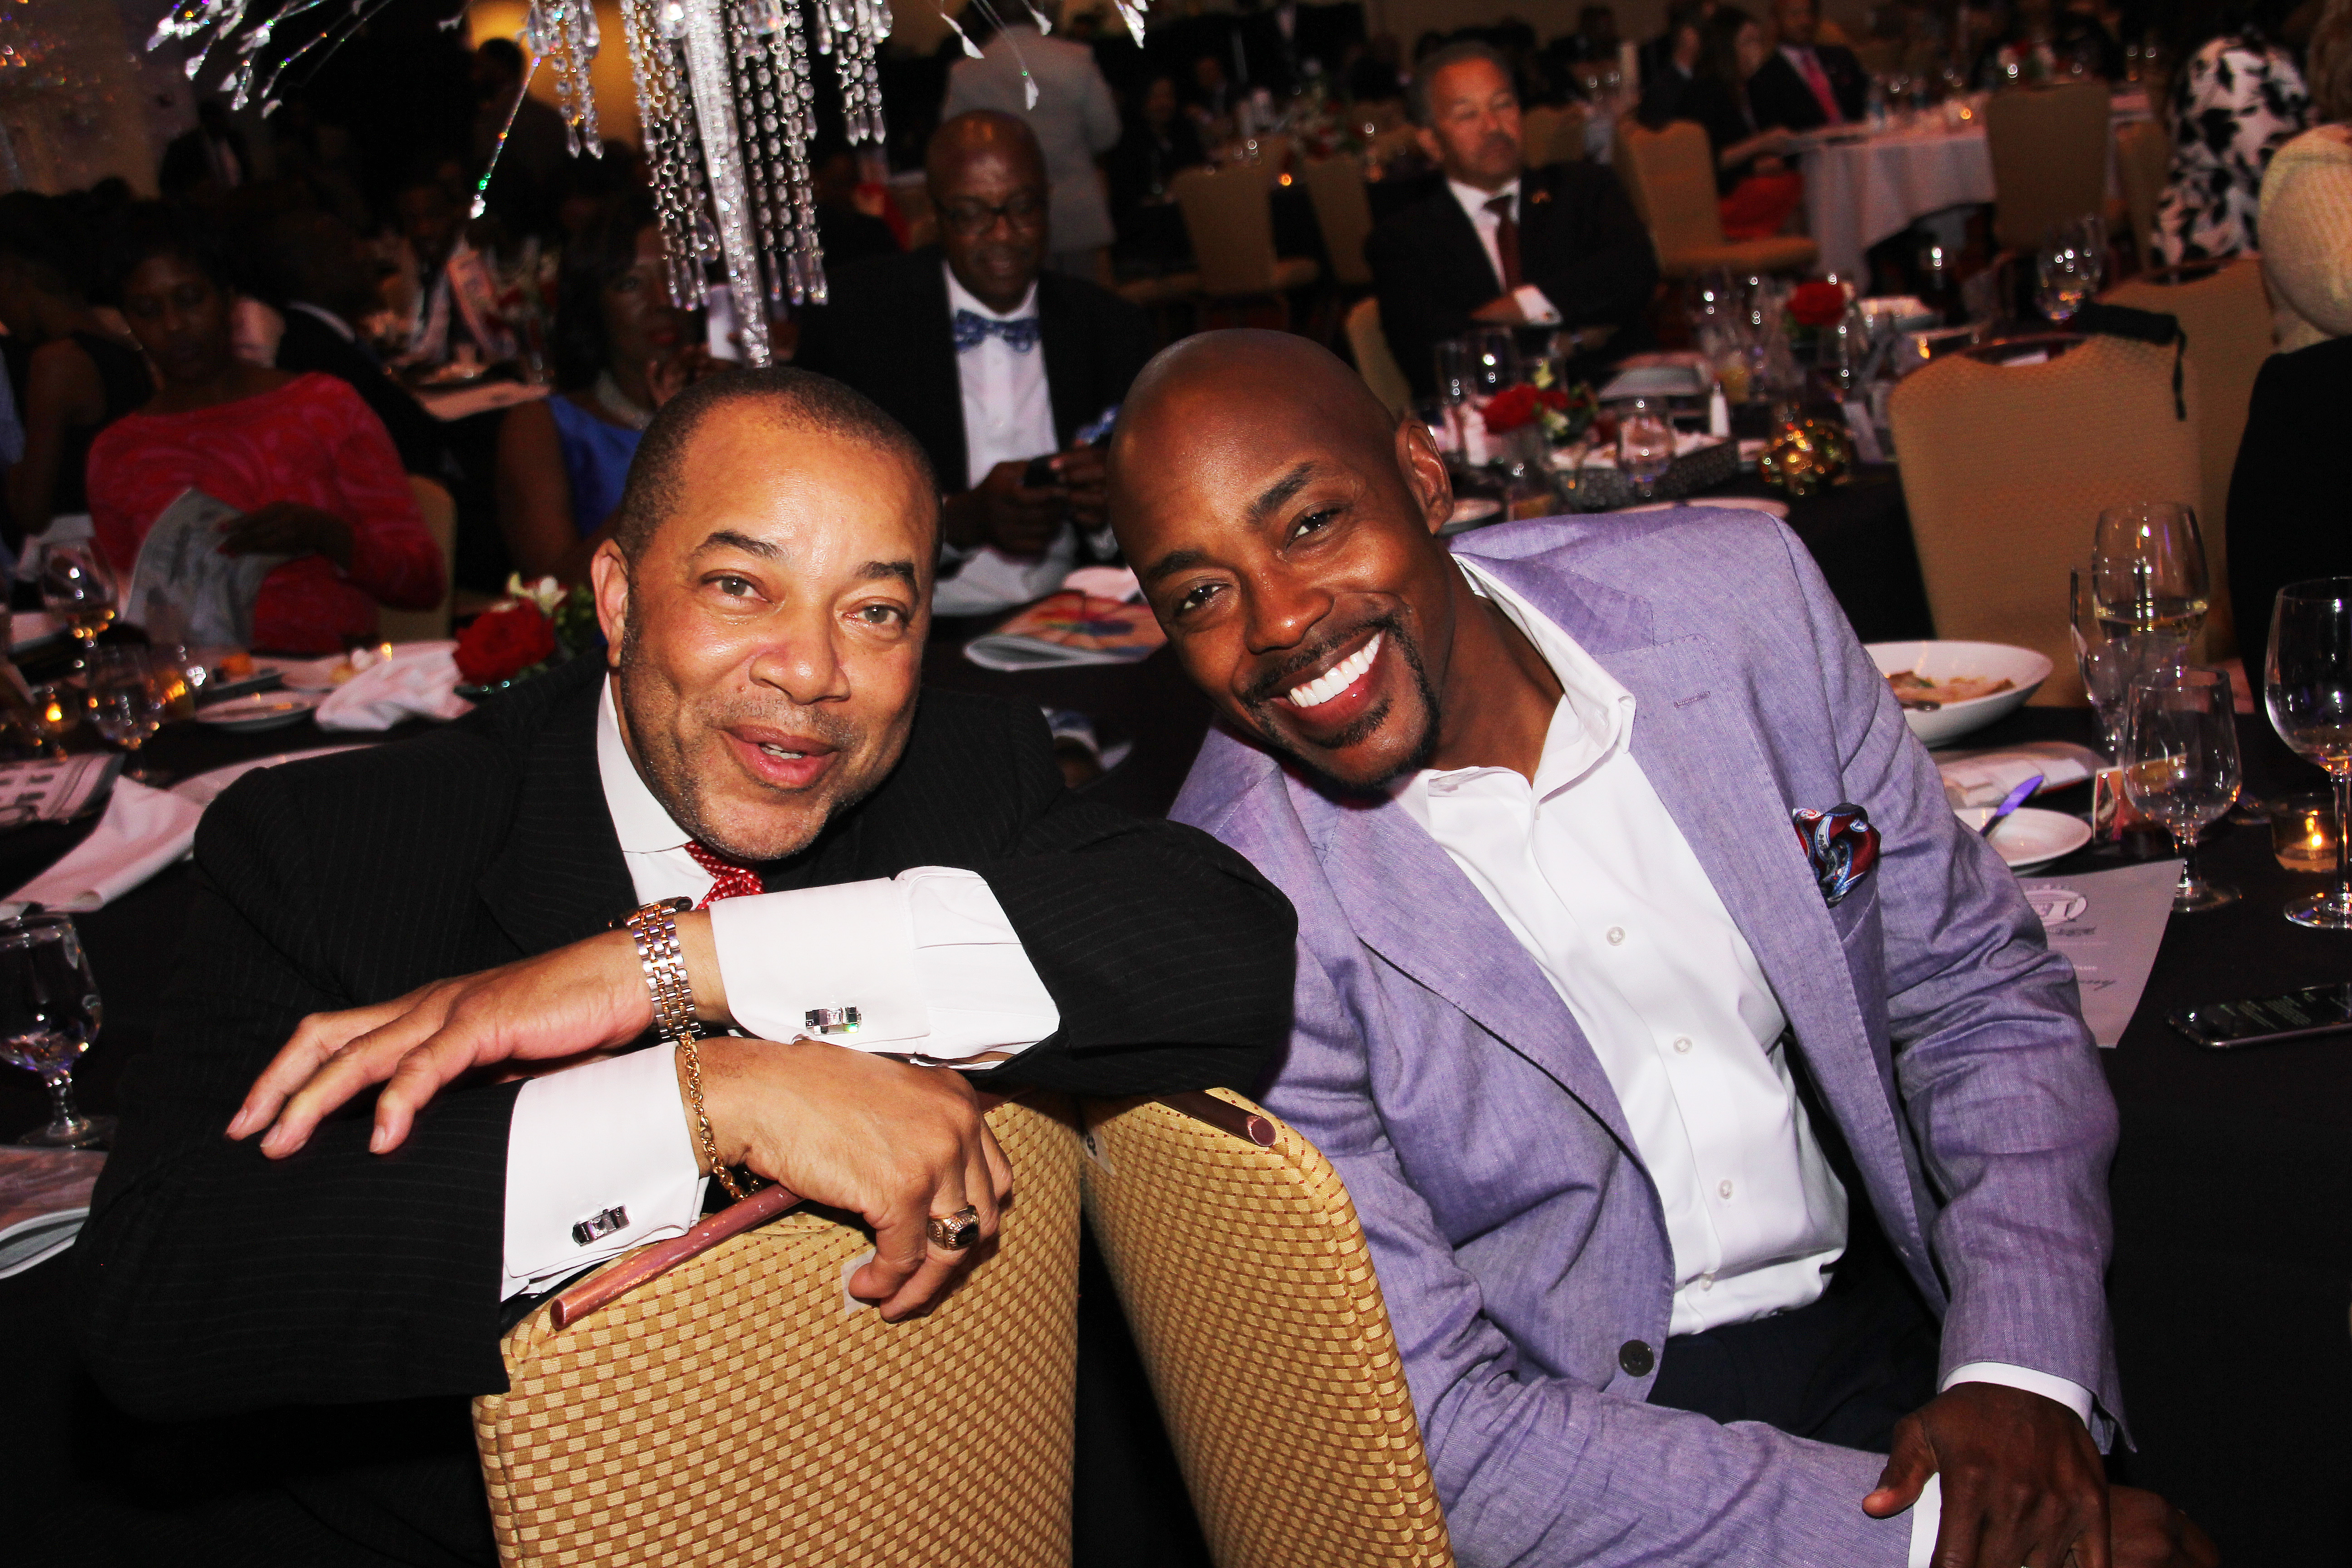 National Black College Alumni Hall of Fame Foundation founder Thomas W. Dortch, left, with "Straight Outta Compton" producer Will Packer. (photos by Terry Shropshire for Atlanta Daily World and Real Times Media). 